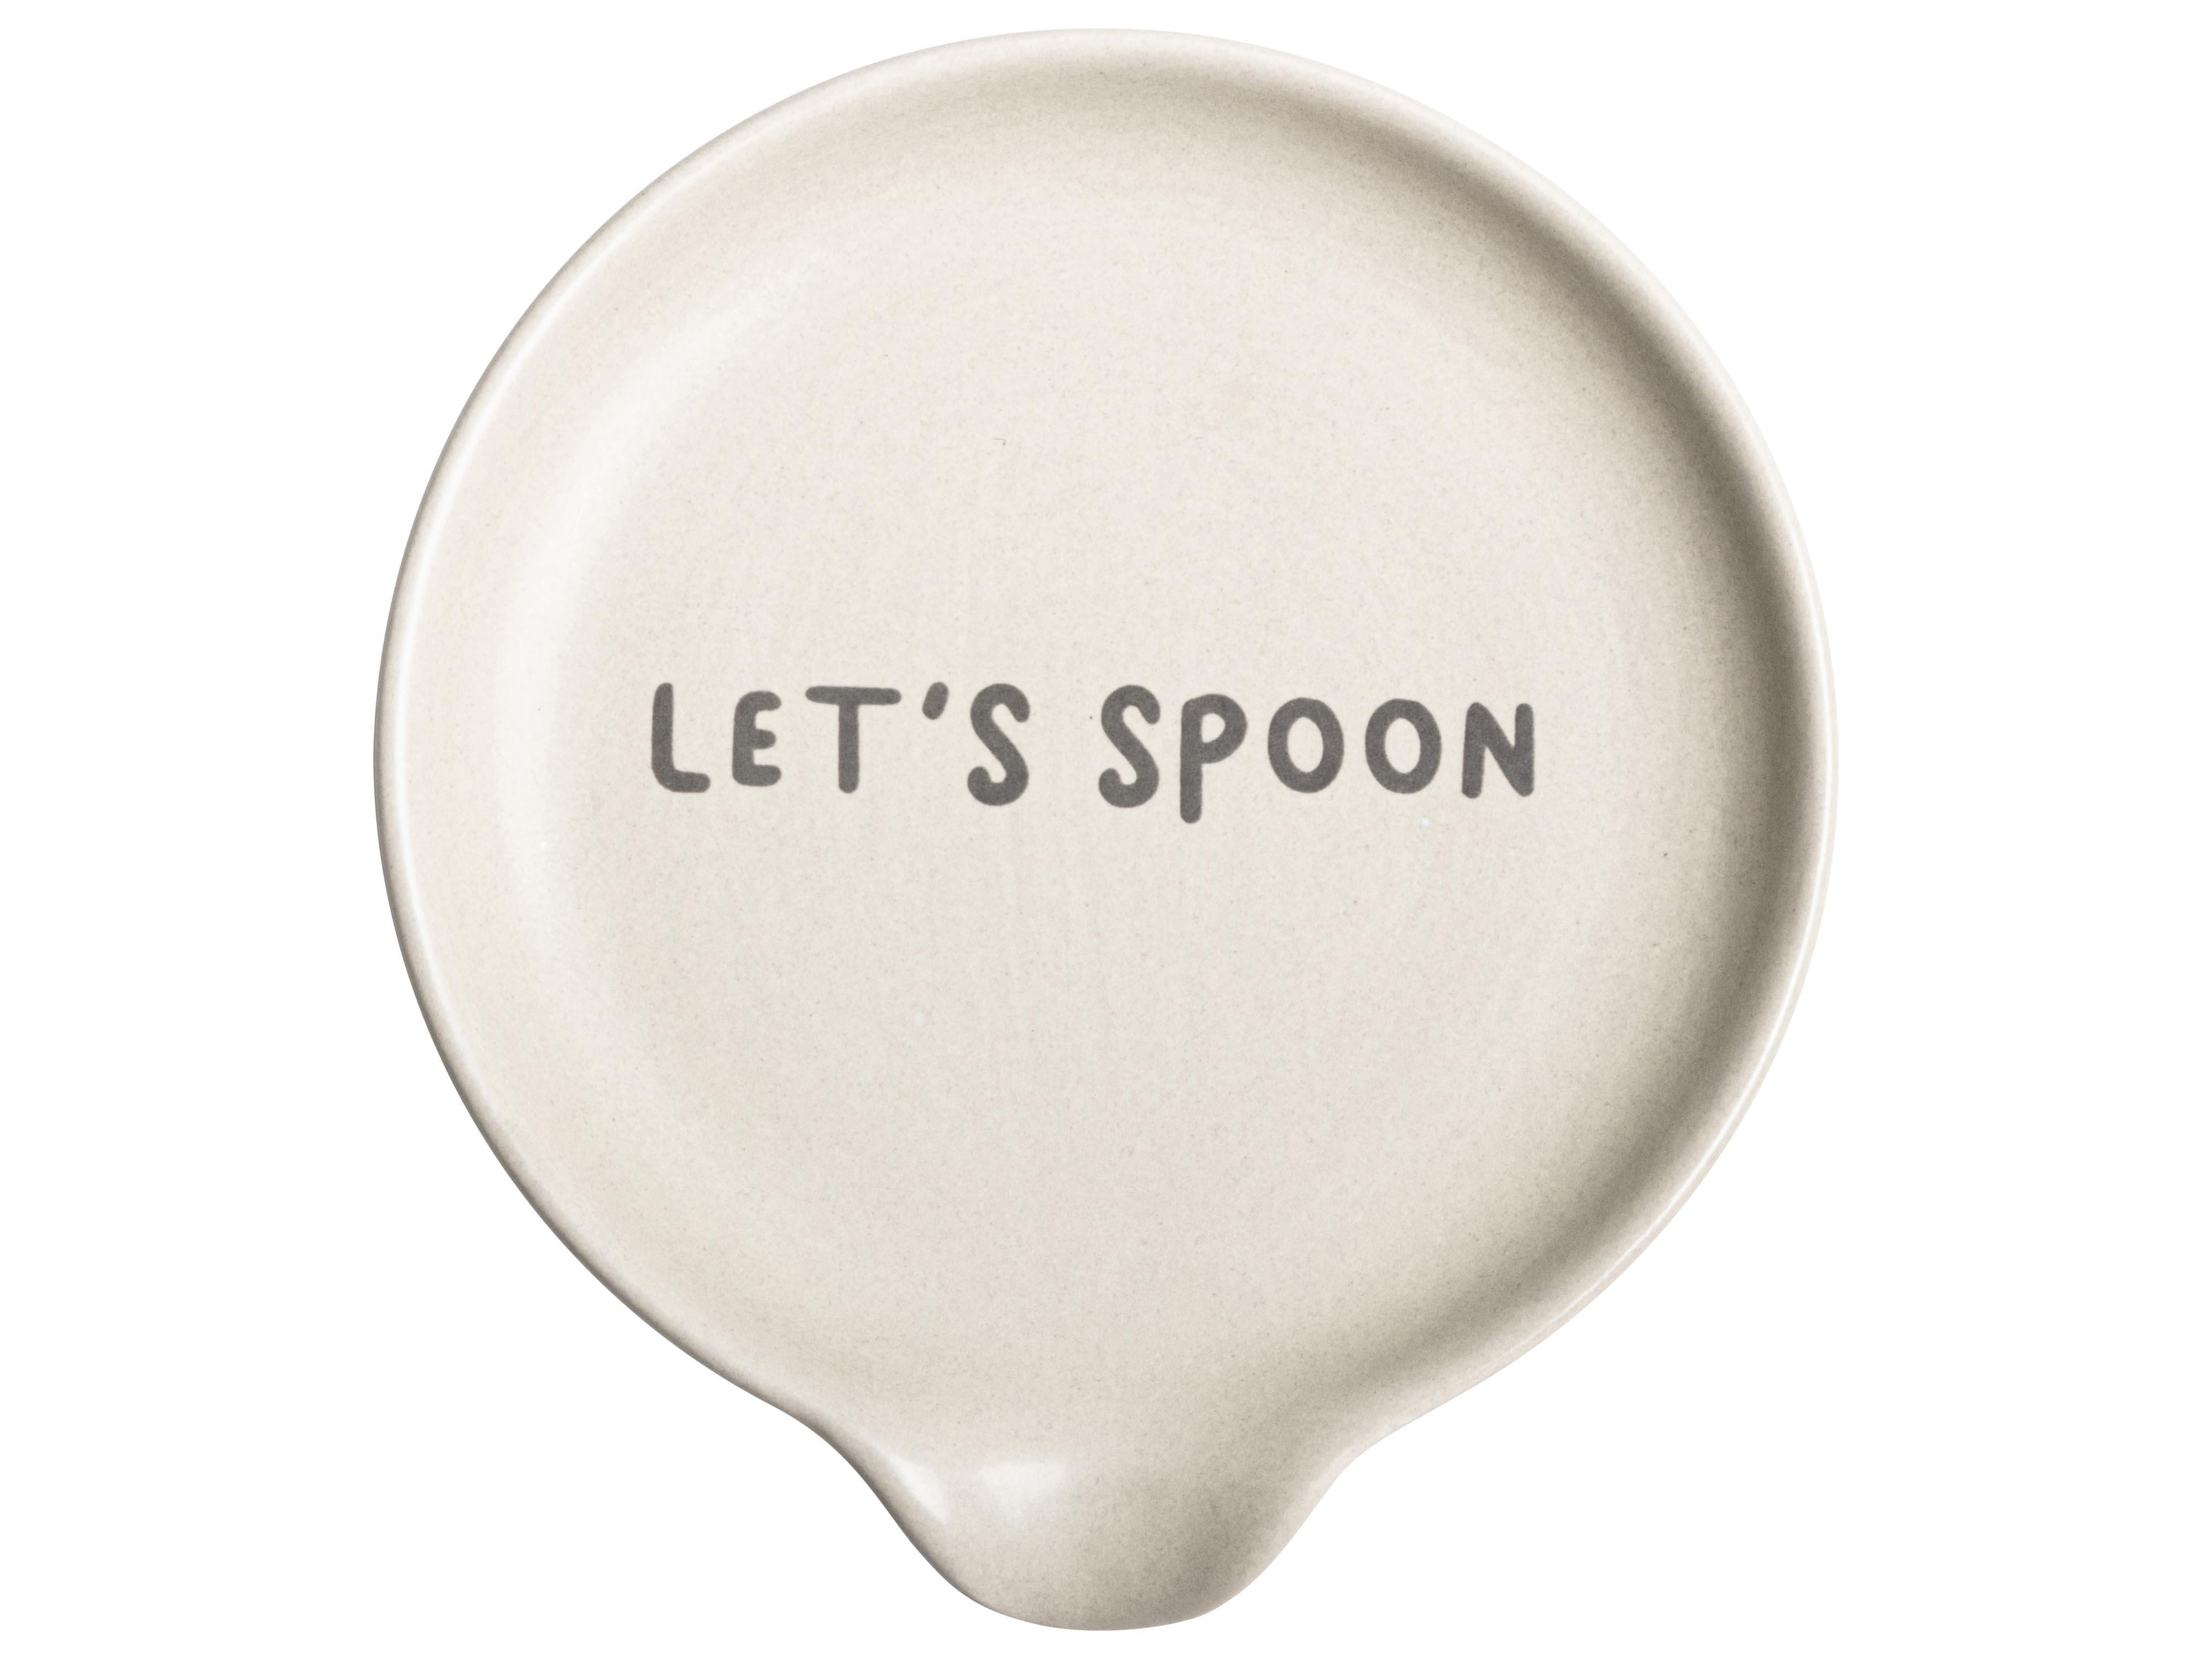 Spoon Holder Lets Spoon Gift